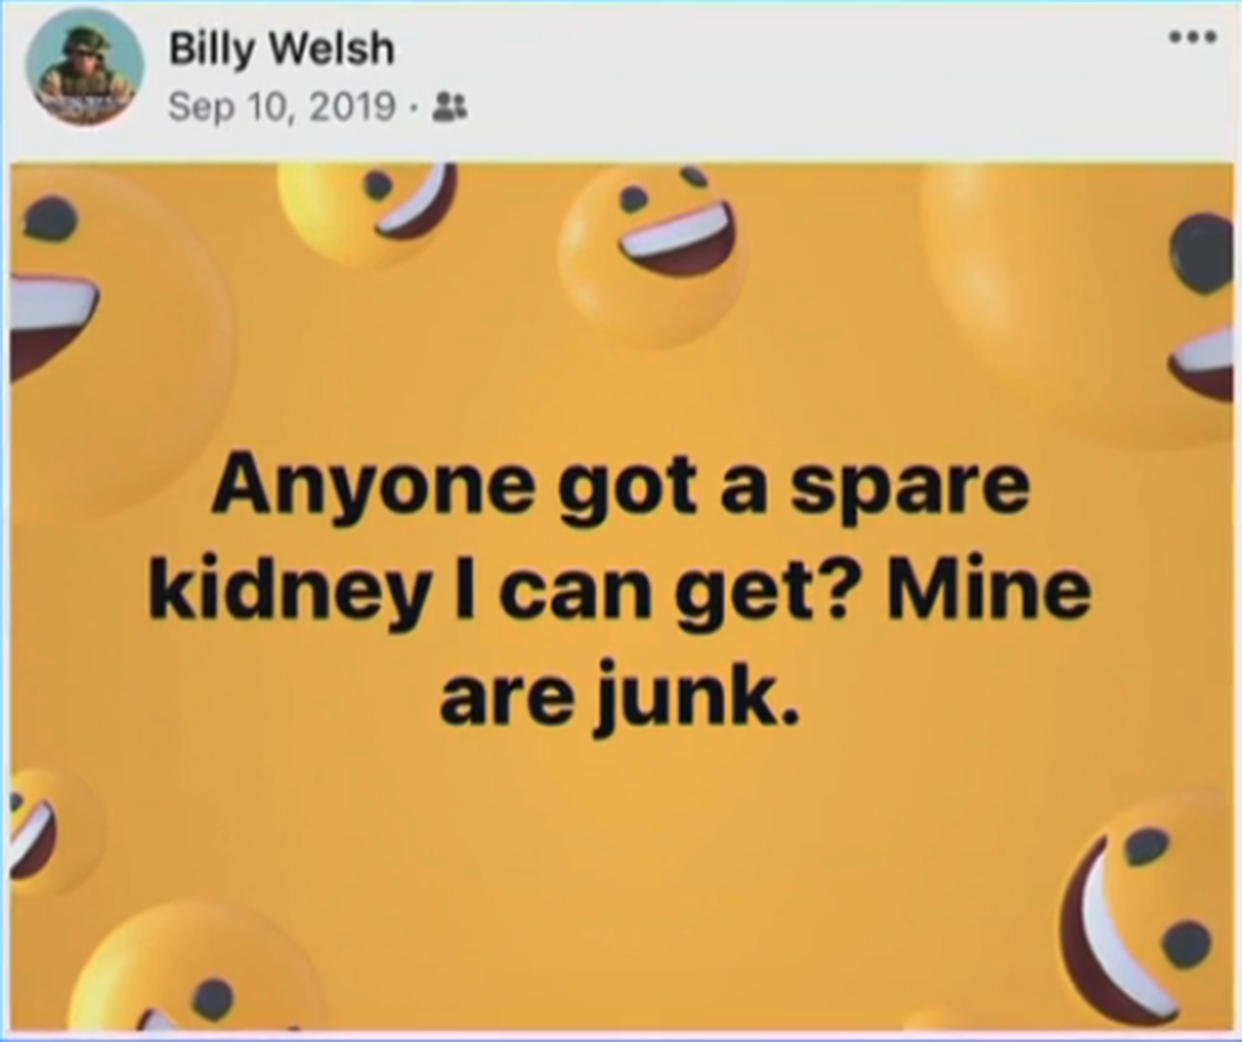 Billy Welsh's 2019 Facebook post prompted John Gladwell to take action. (TODAY)